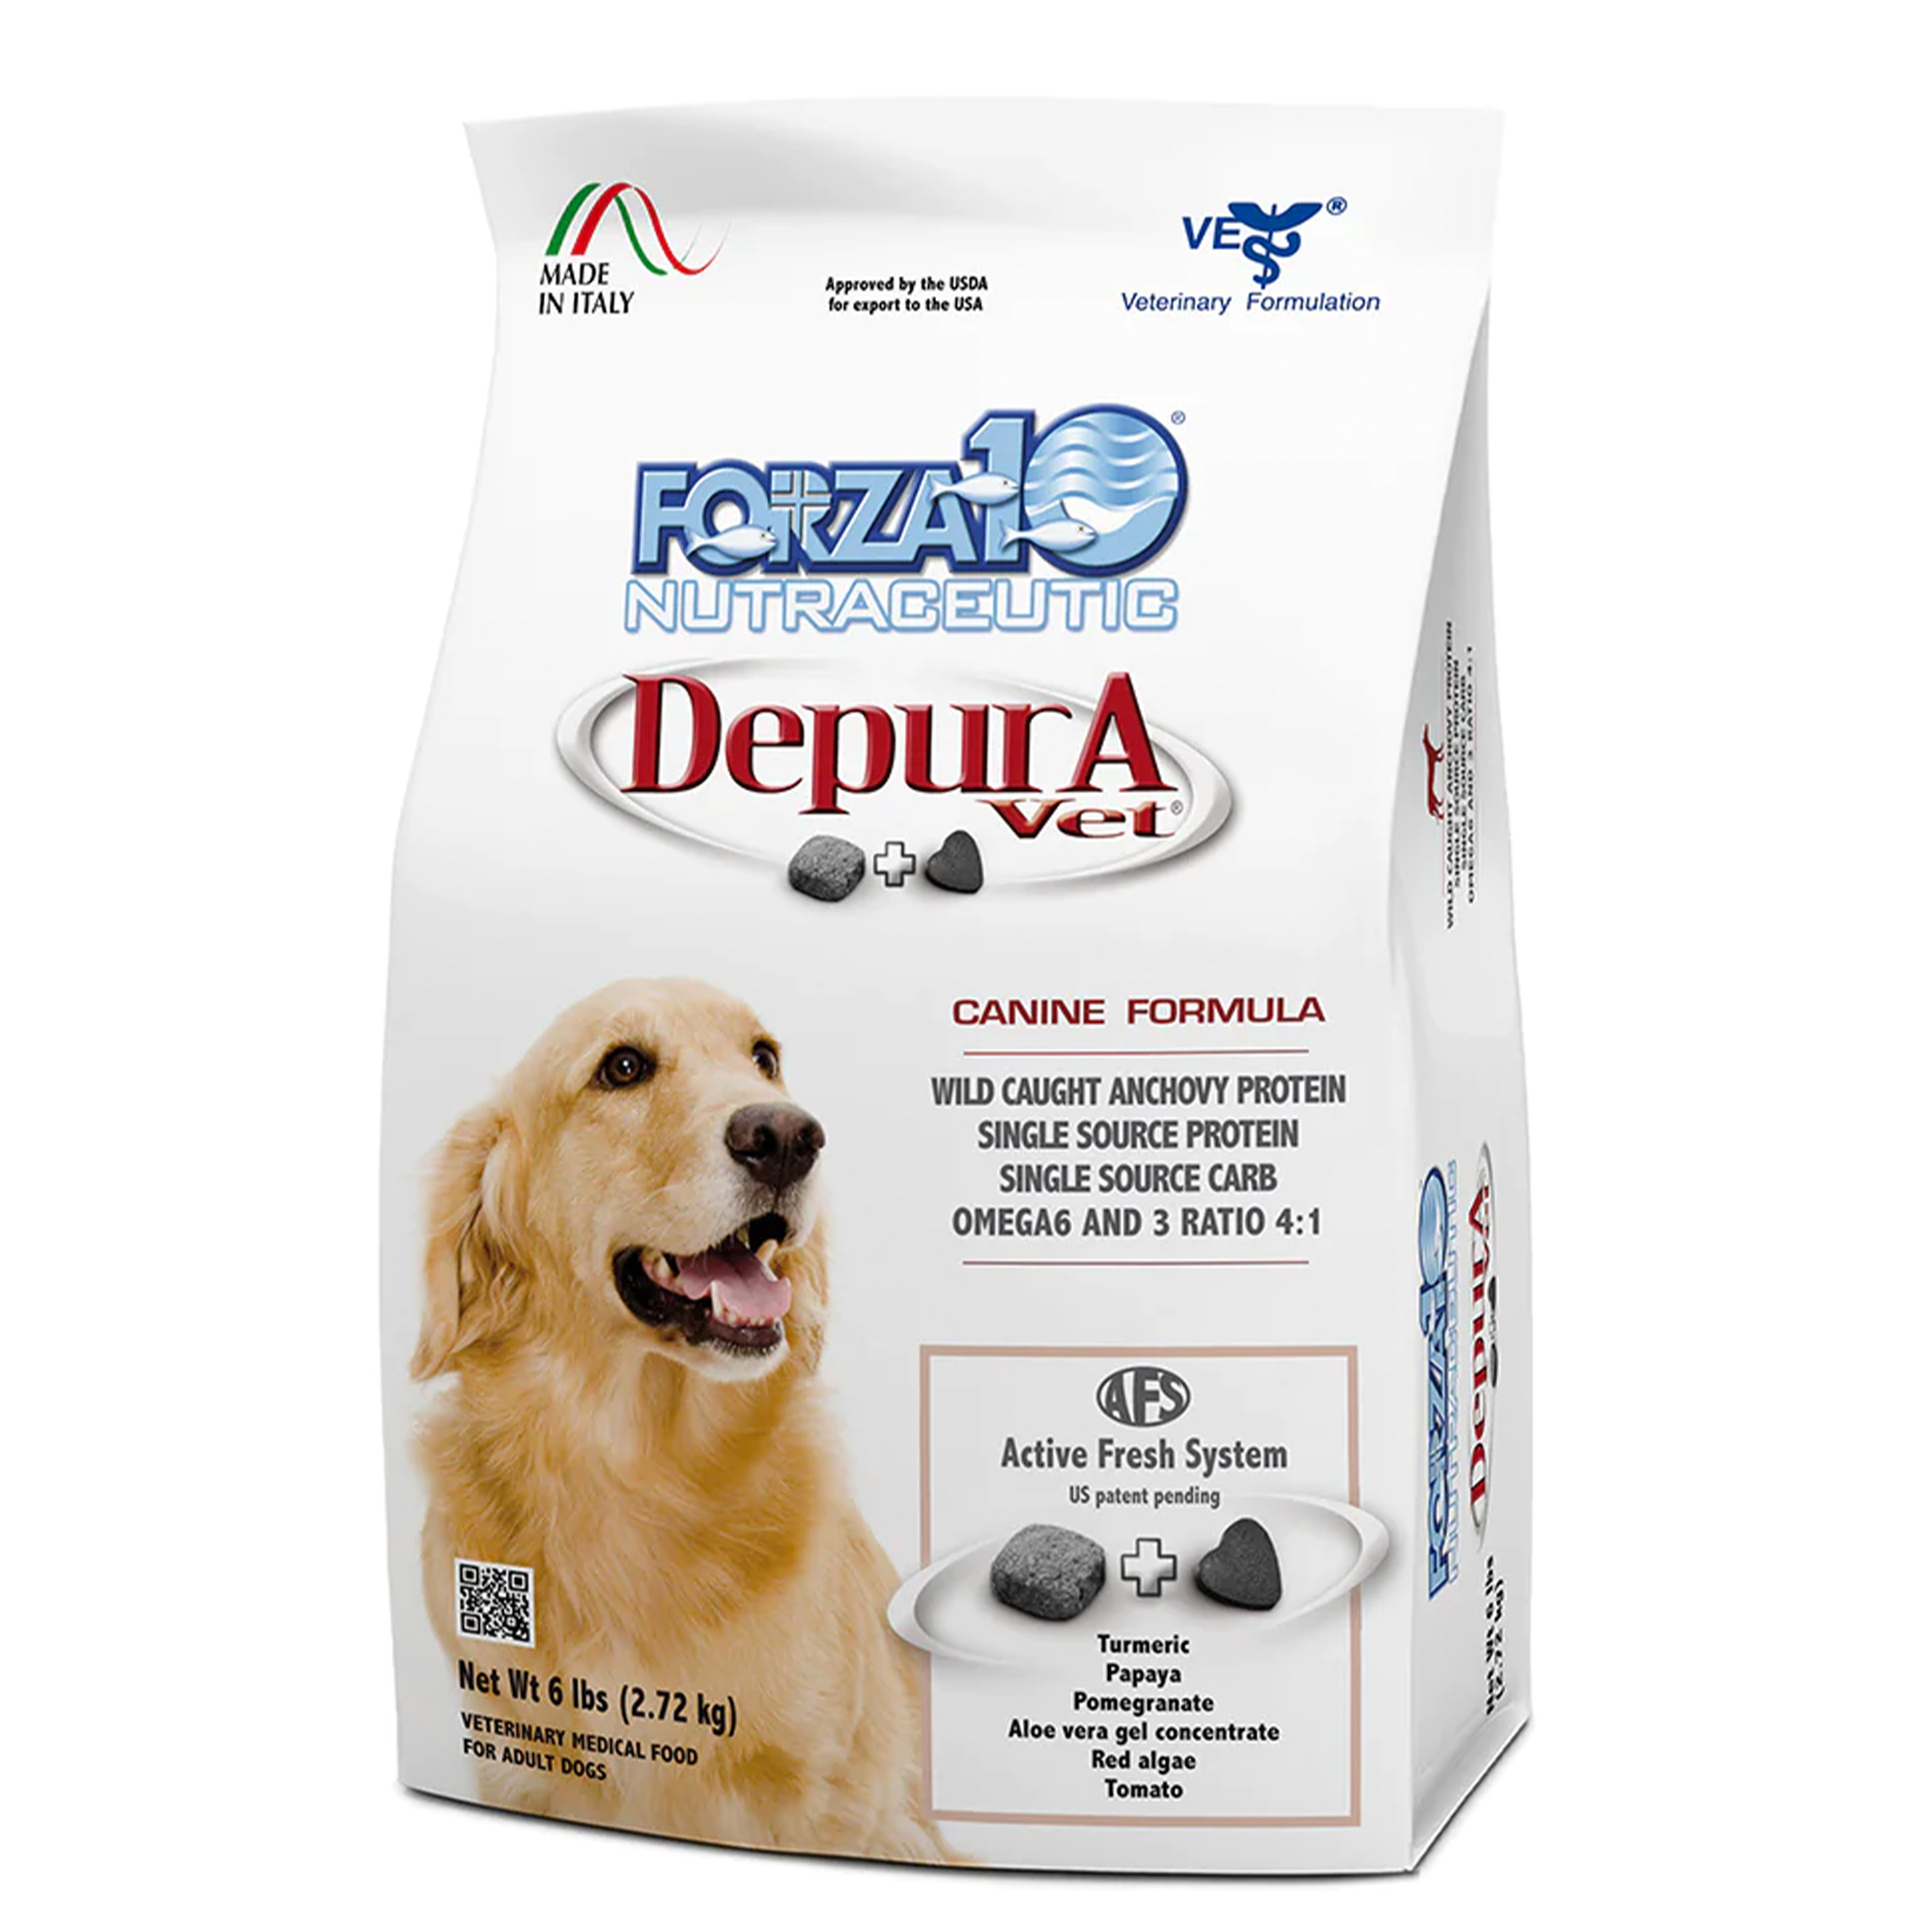 Forza10 Nutraceutic Active DepurA Diet Fish Dry Dog Food Usage